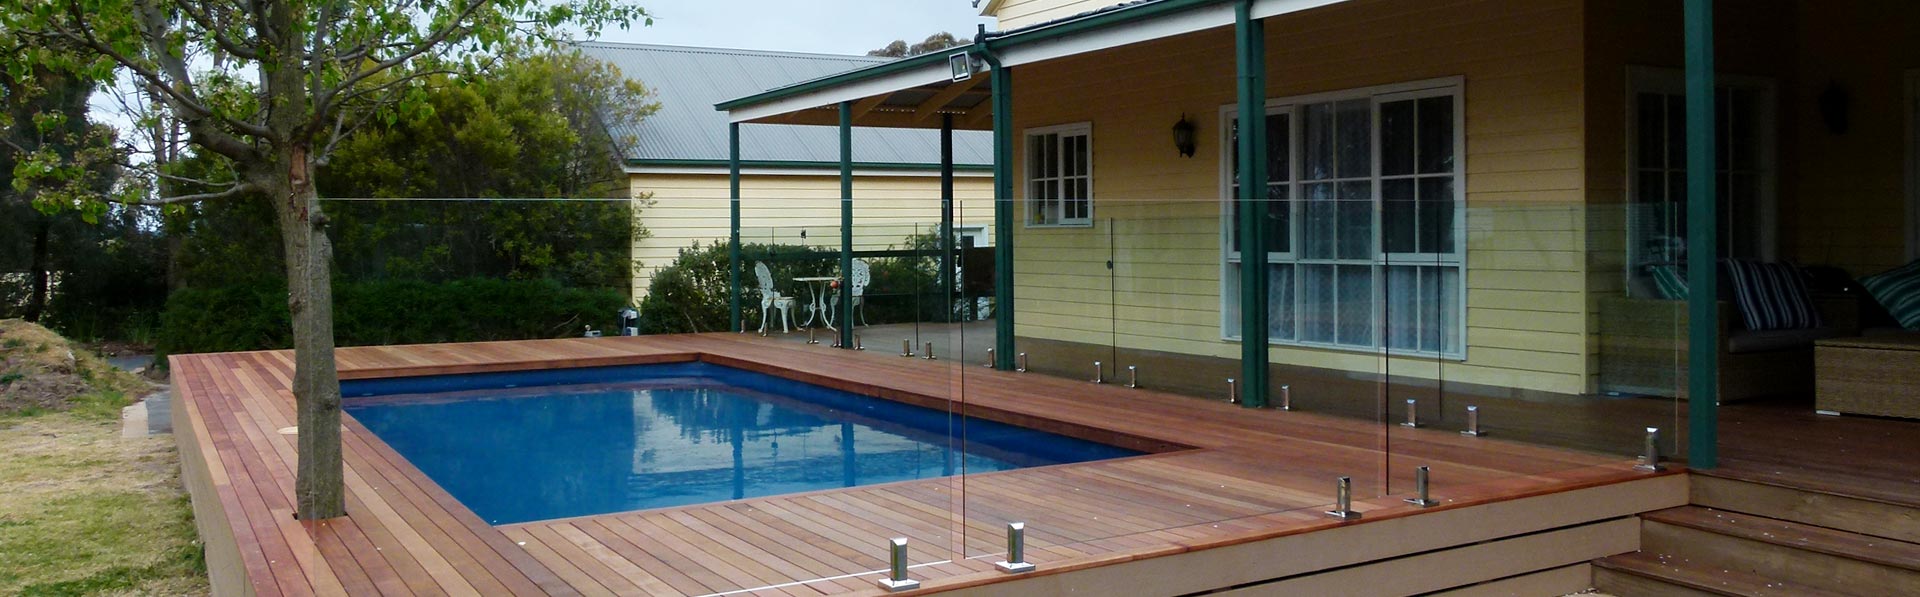 brightwaters above ground pool